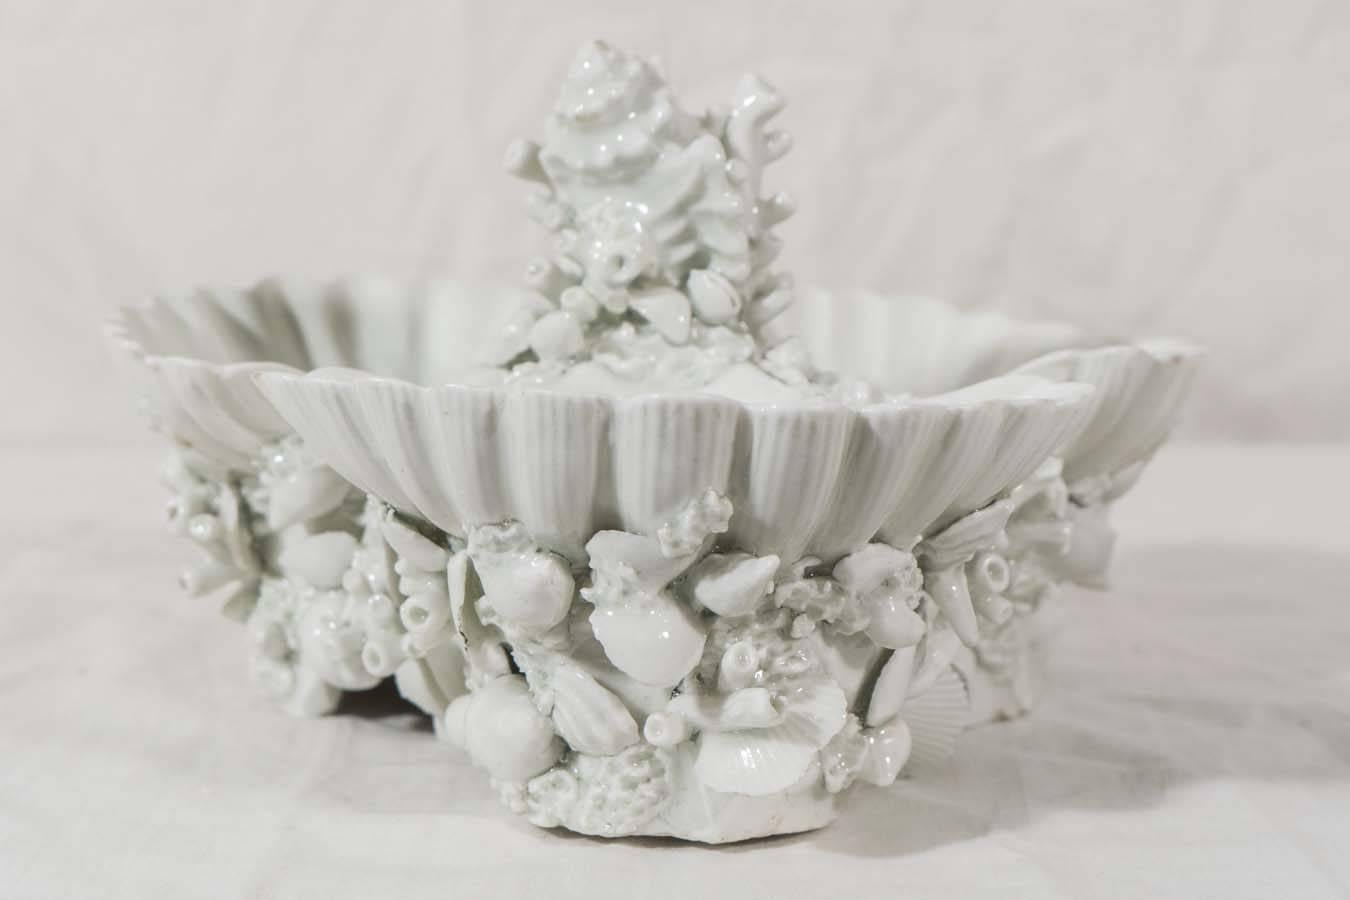 A rare 18th century Worcester porcelain shell shaped sweetmeat dish elaborately formed as three scallop shells. The shells were probably cast from actual specimens. Each scallop shell sits among a profusion of smaller sea shells and seaweed. Rising